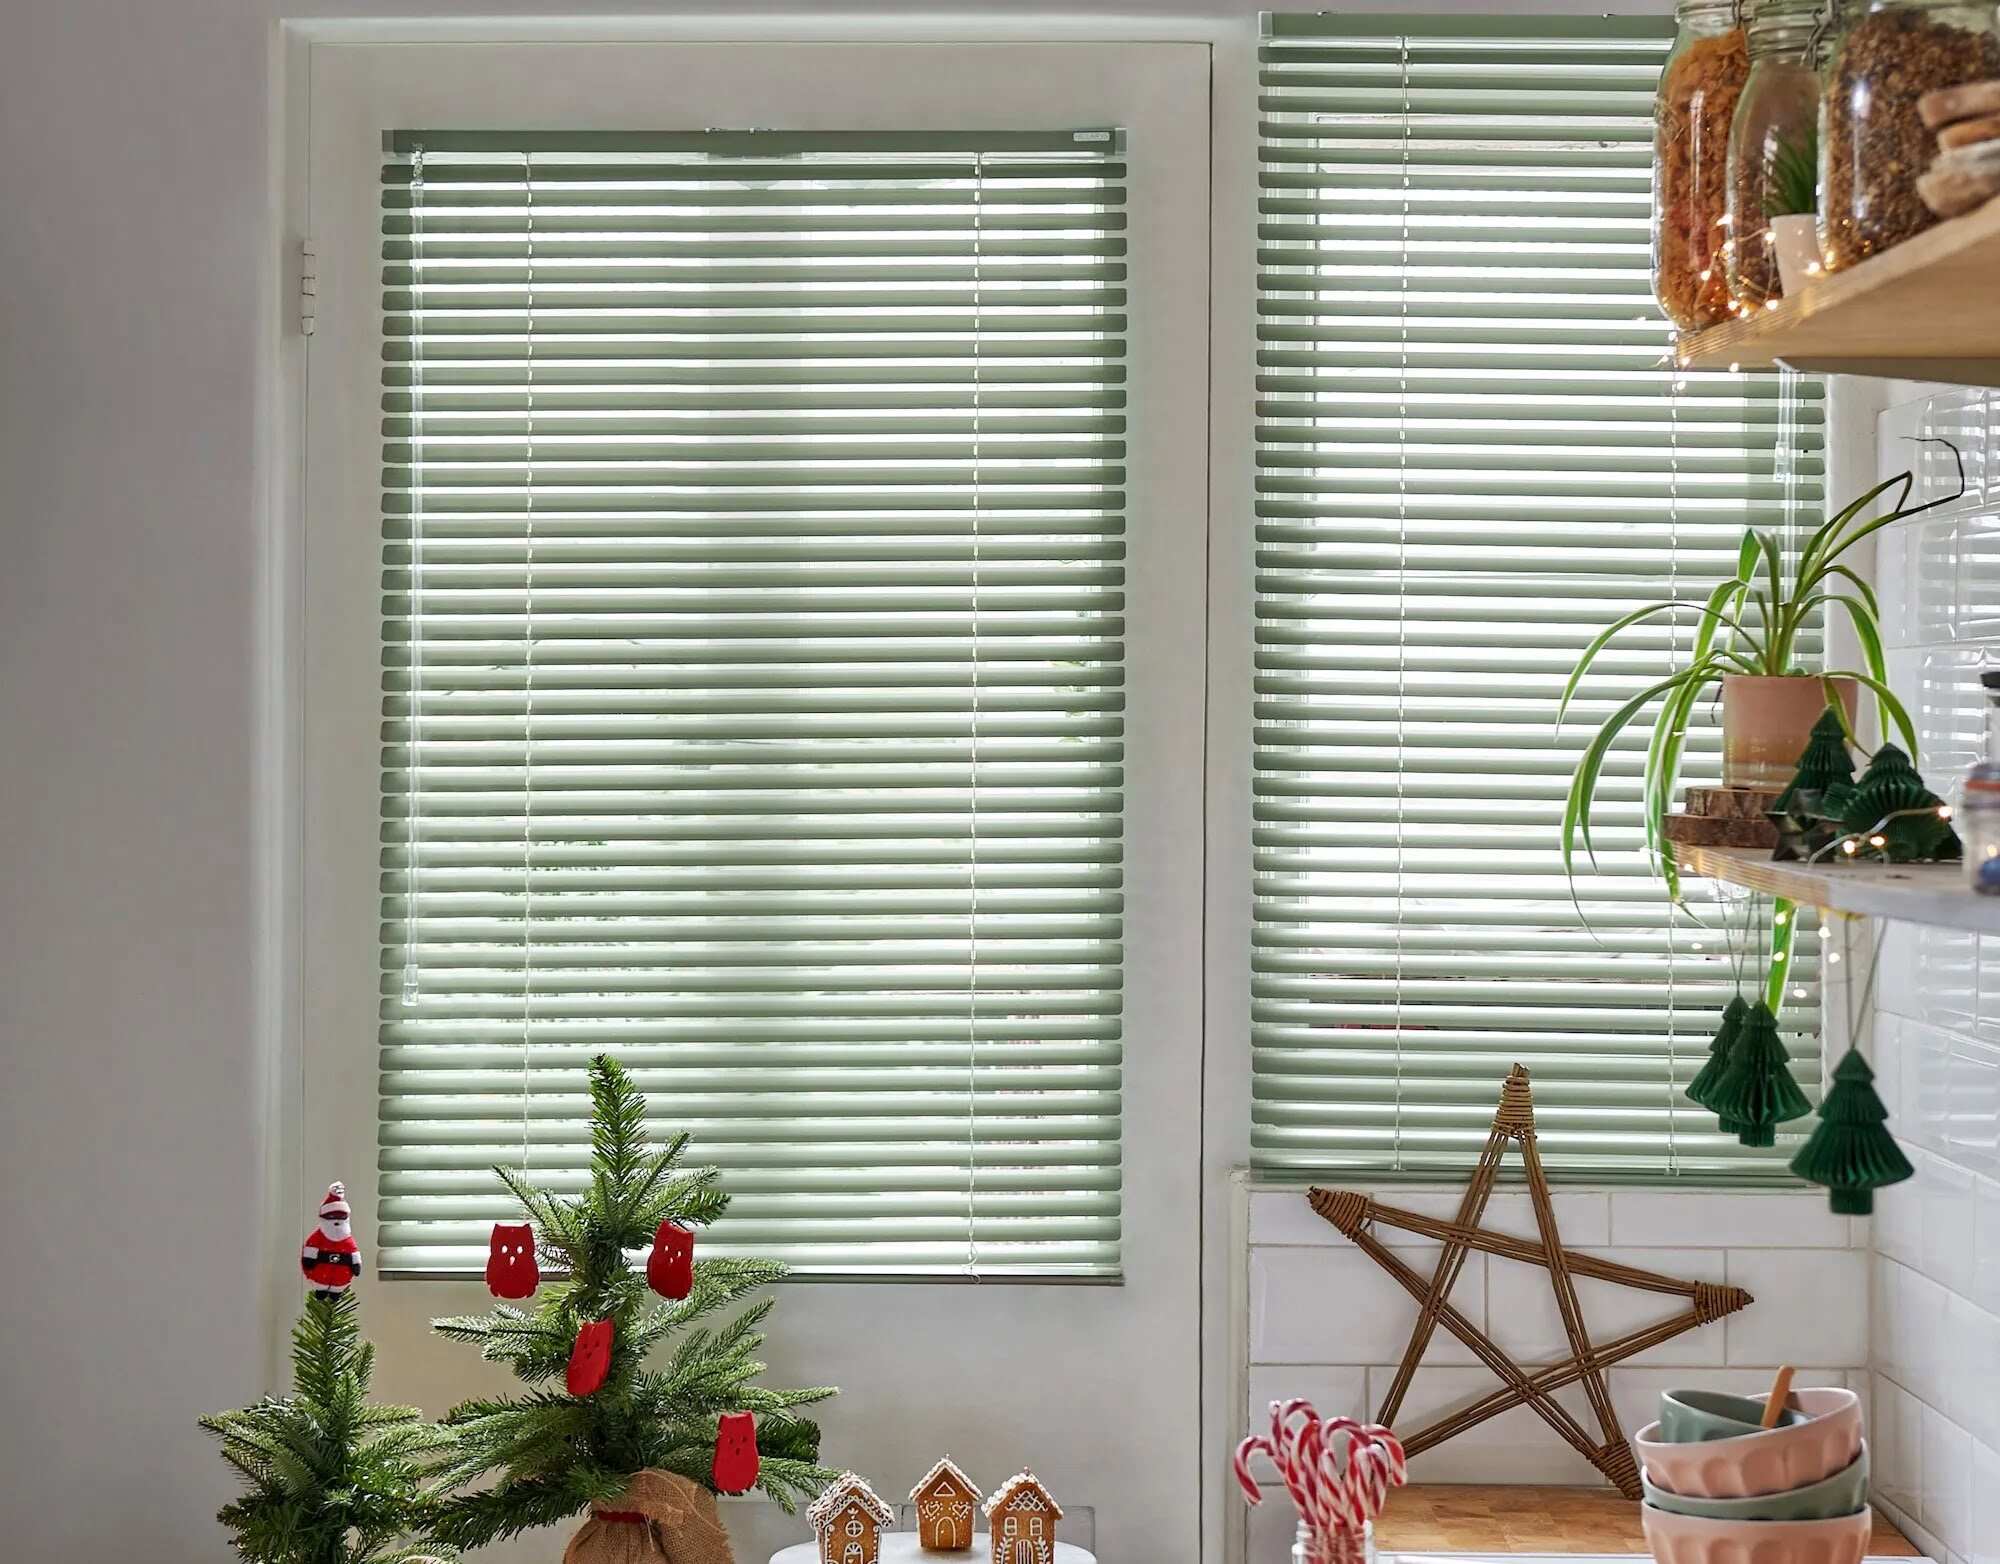 How To Make Venetian Blinds | Storables